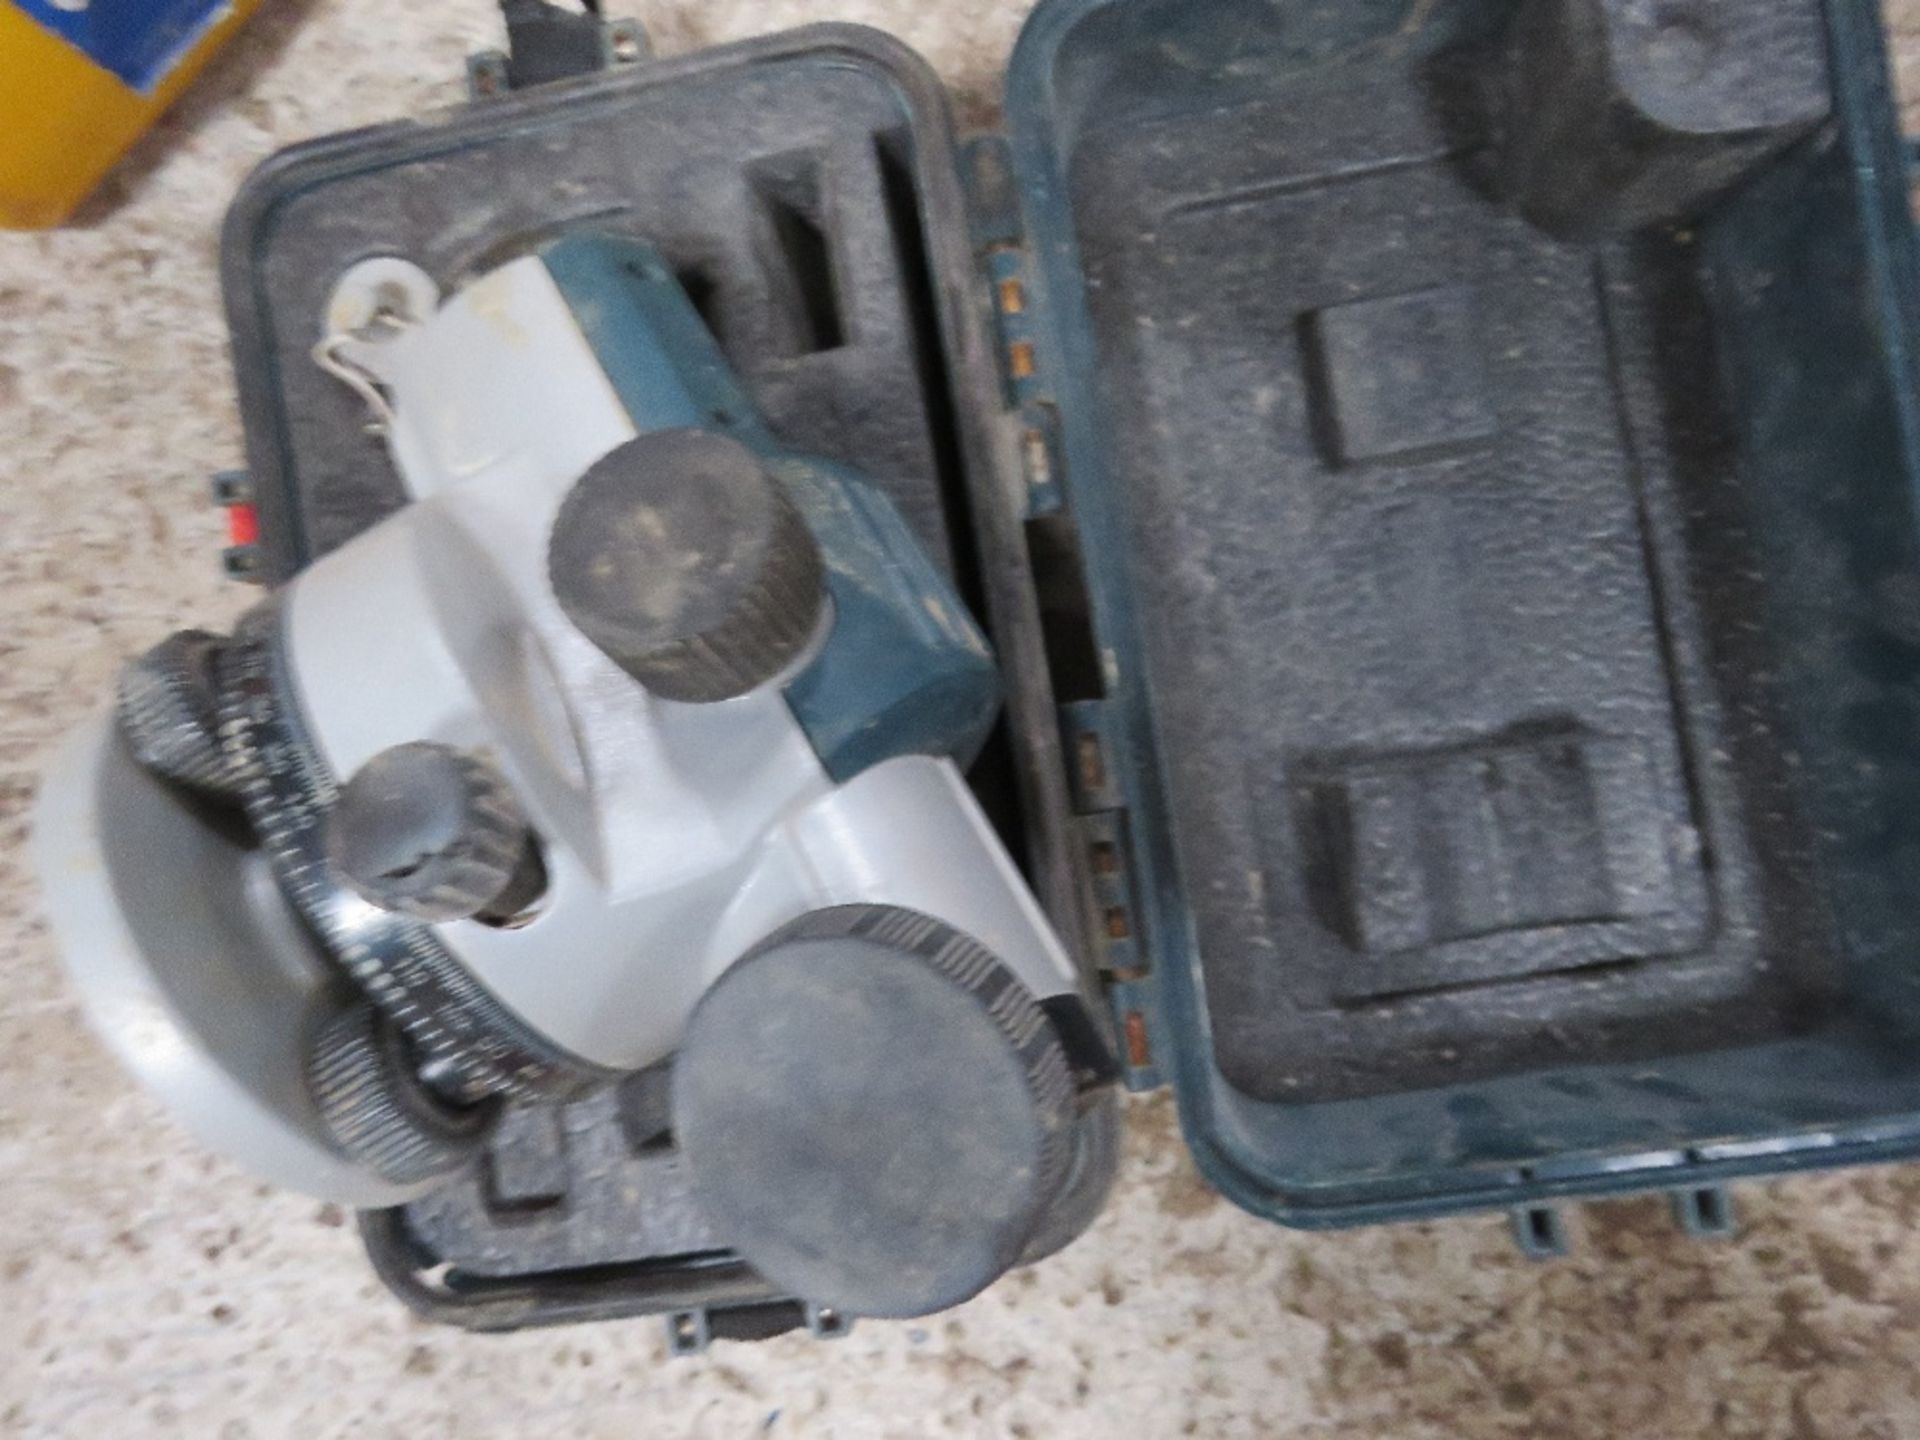 BOSCH SURVEY LEVEL IN A CASE. SOURCED FROM GARAGE COMPANY LIQUIDATION. - Image 2 of 5